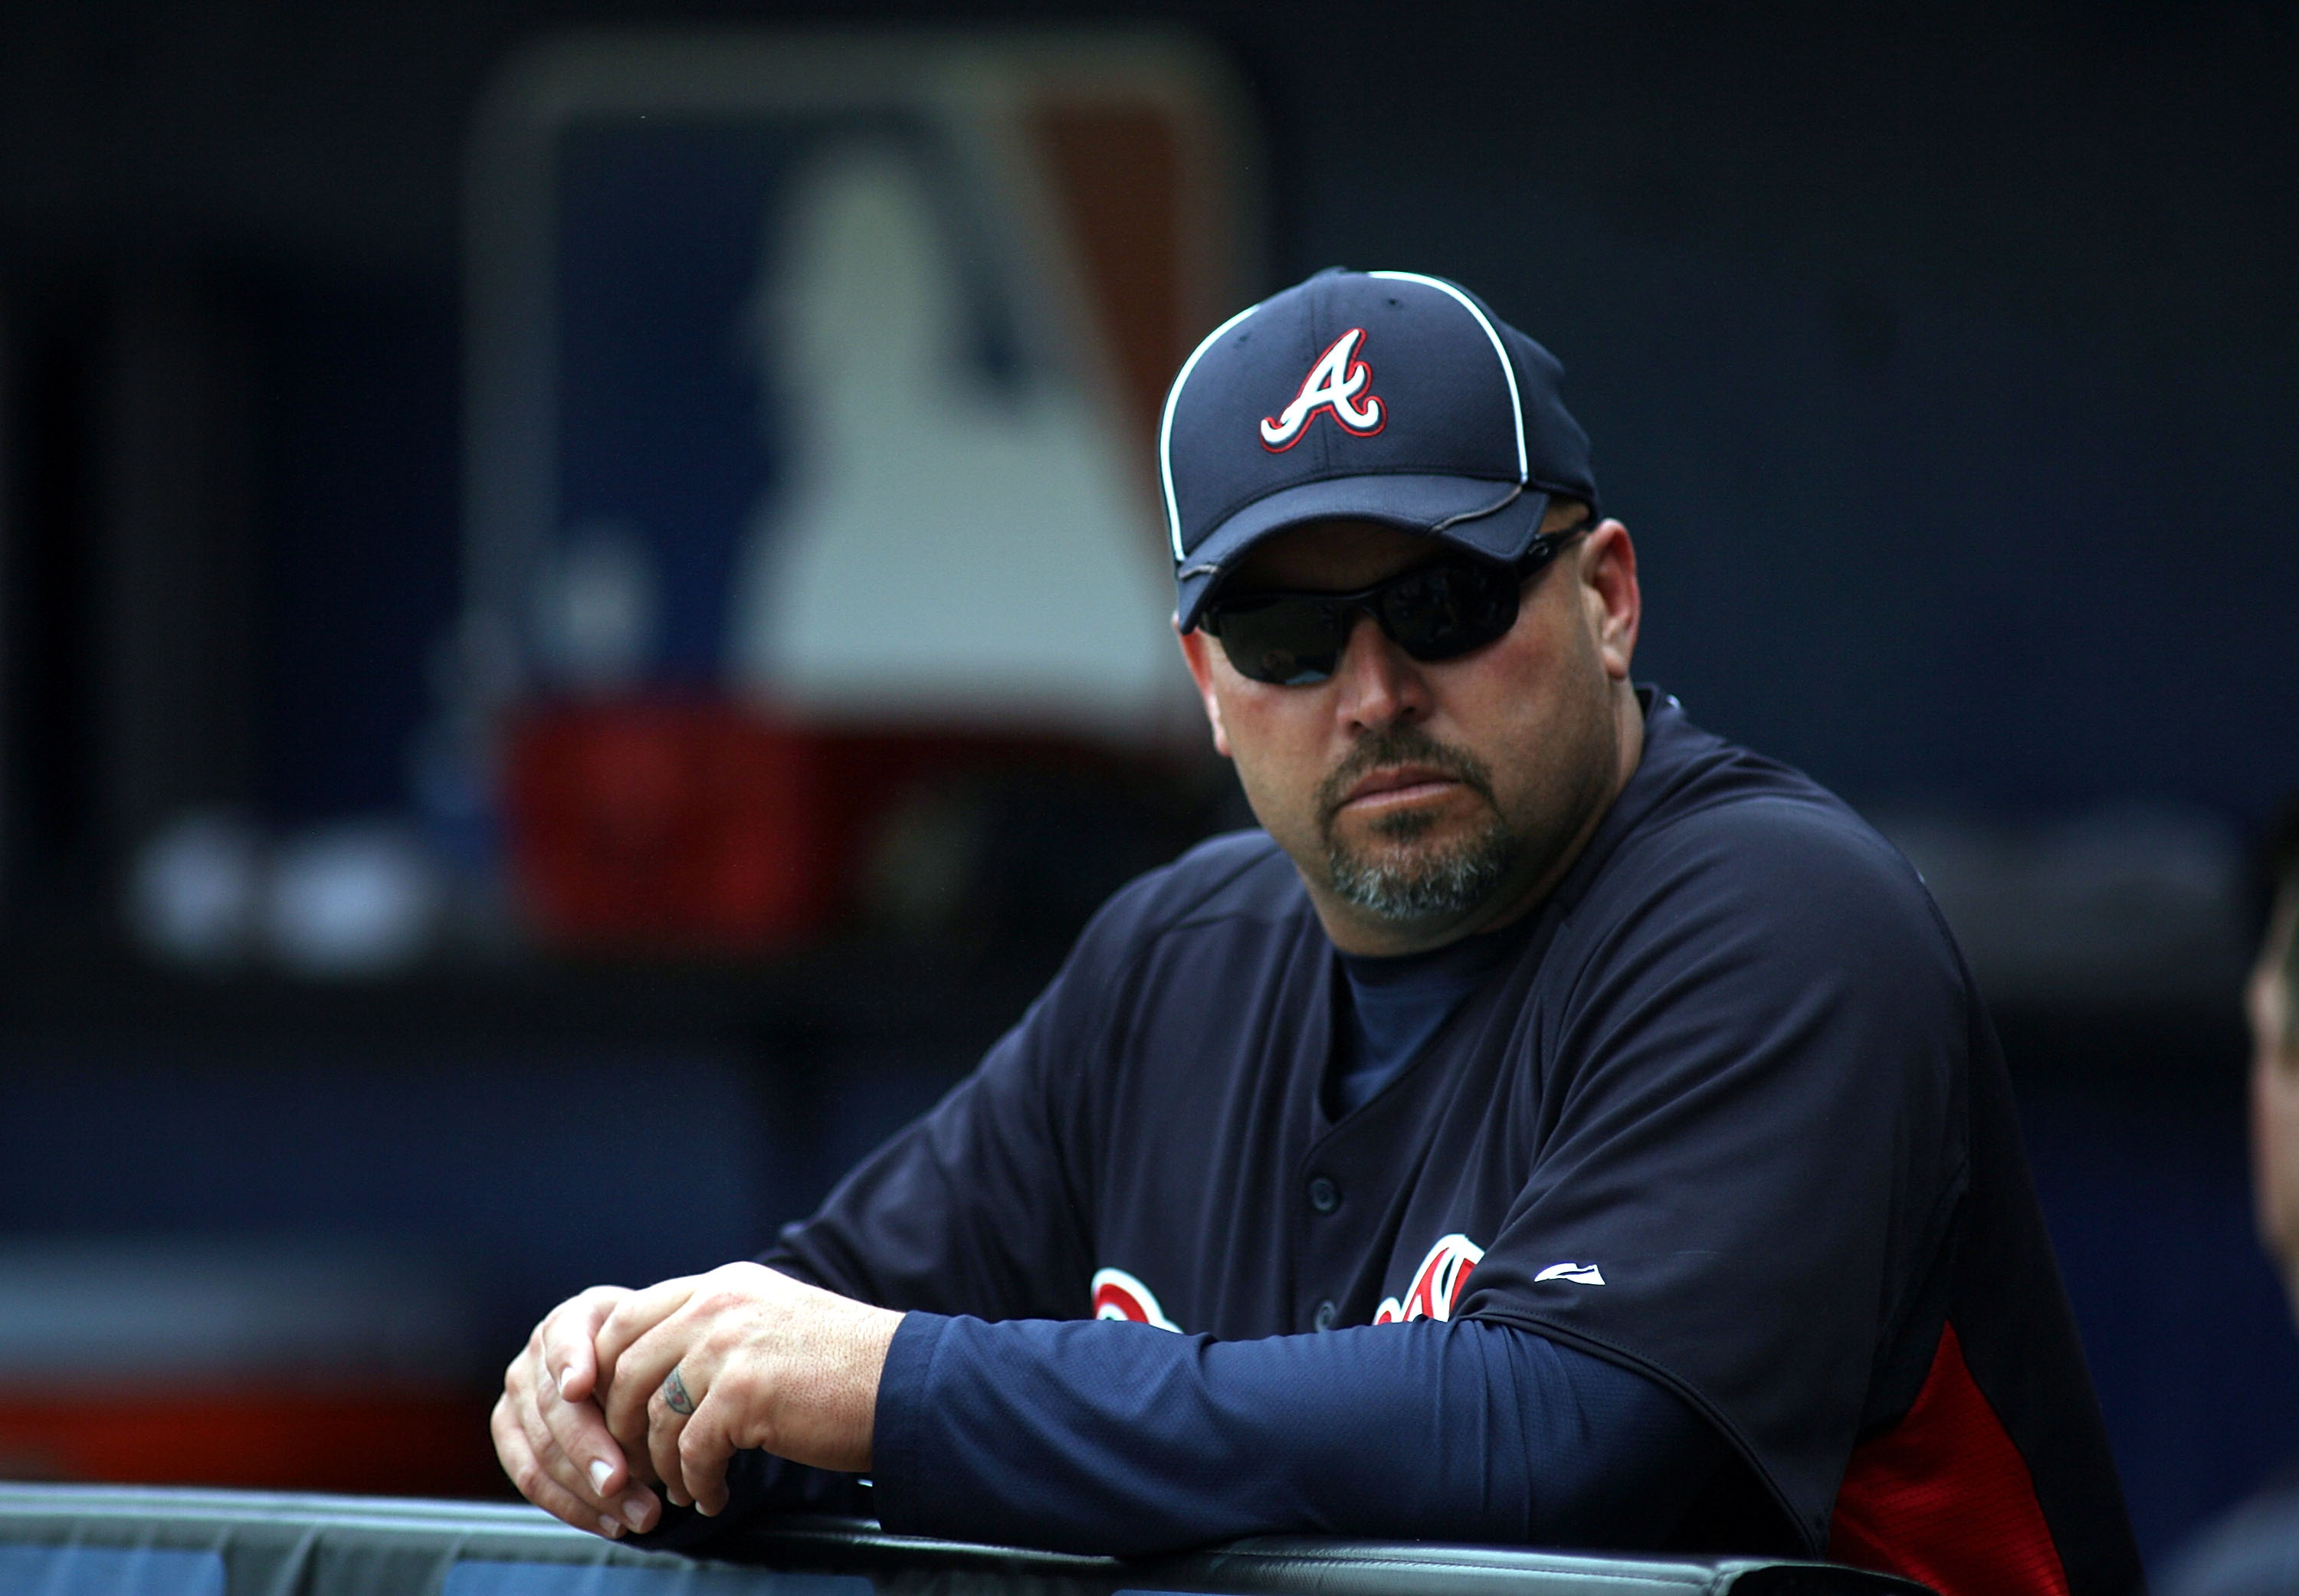 PORT ST. LUCIE, FL - FEBRUARY 26:  Manager Freddie Gonzalez of the Atlanta Braves watches  prior to playing against the New York Mets at Digital Domain Park on February 26, 2011 in Port St. Lucie, Florida.  (Photo by Marc Serota/Getty Images)